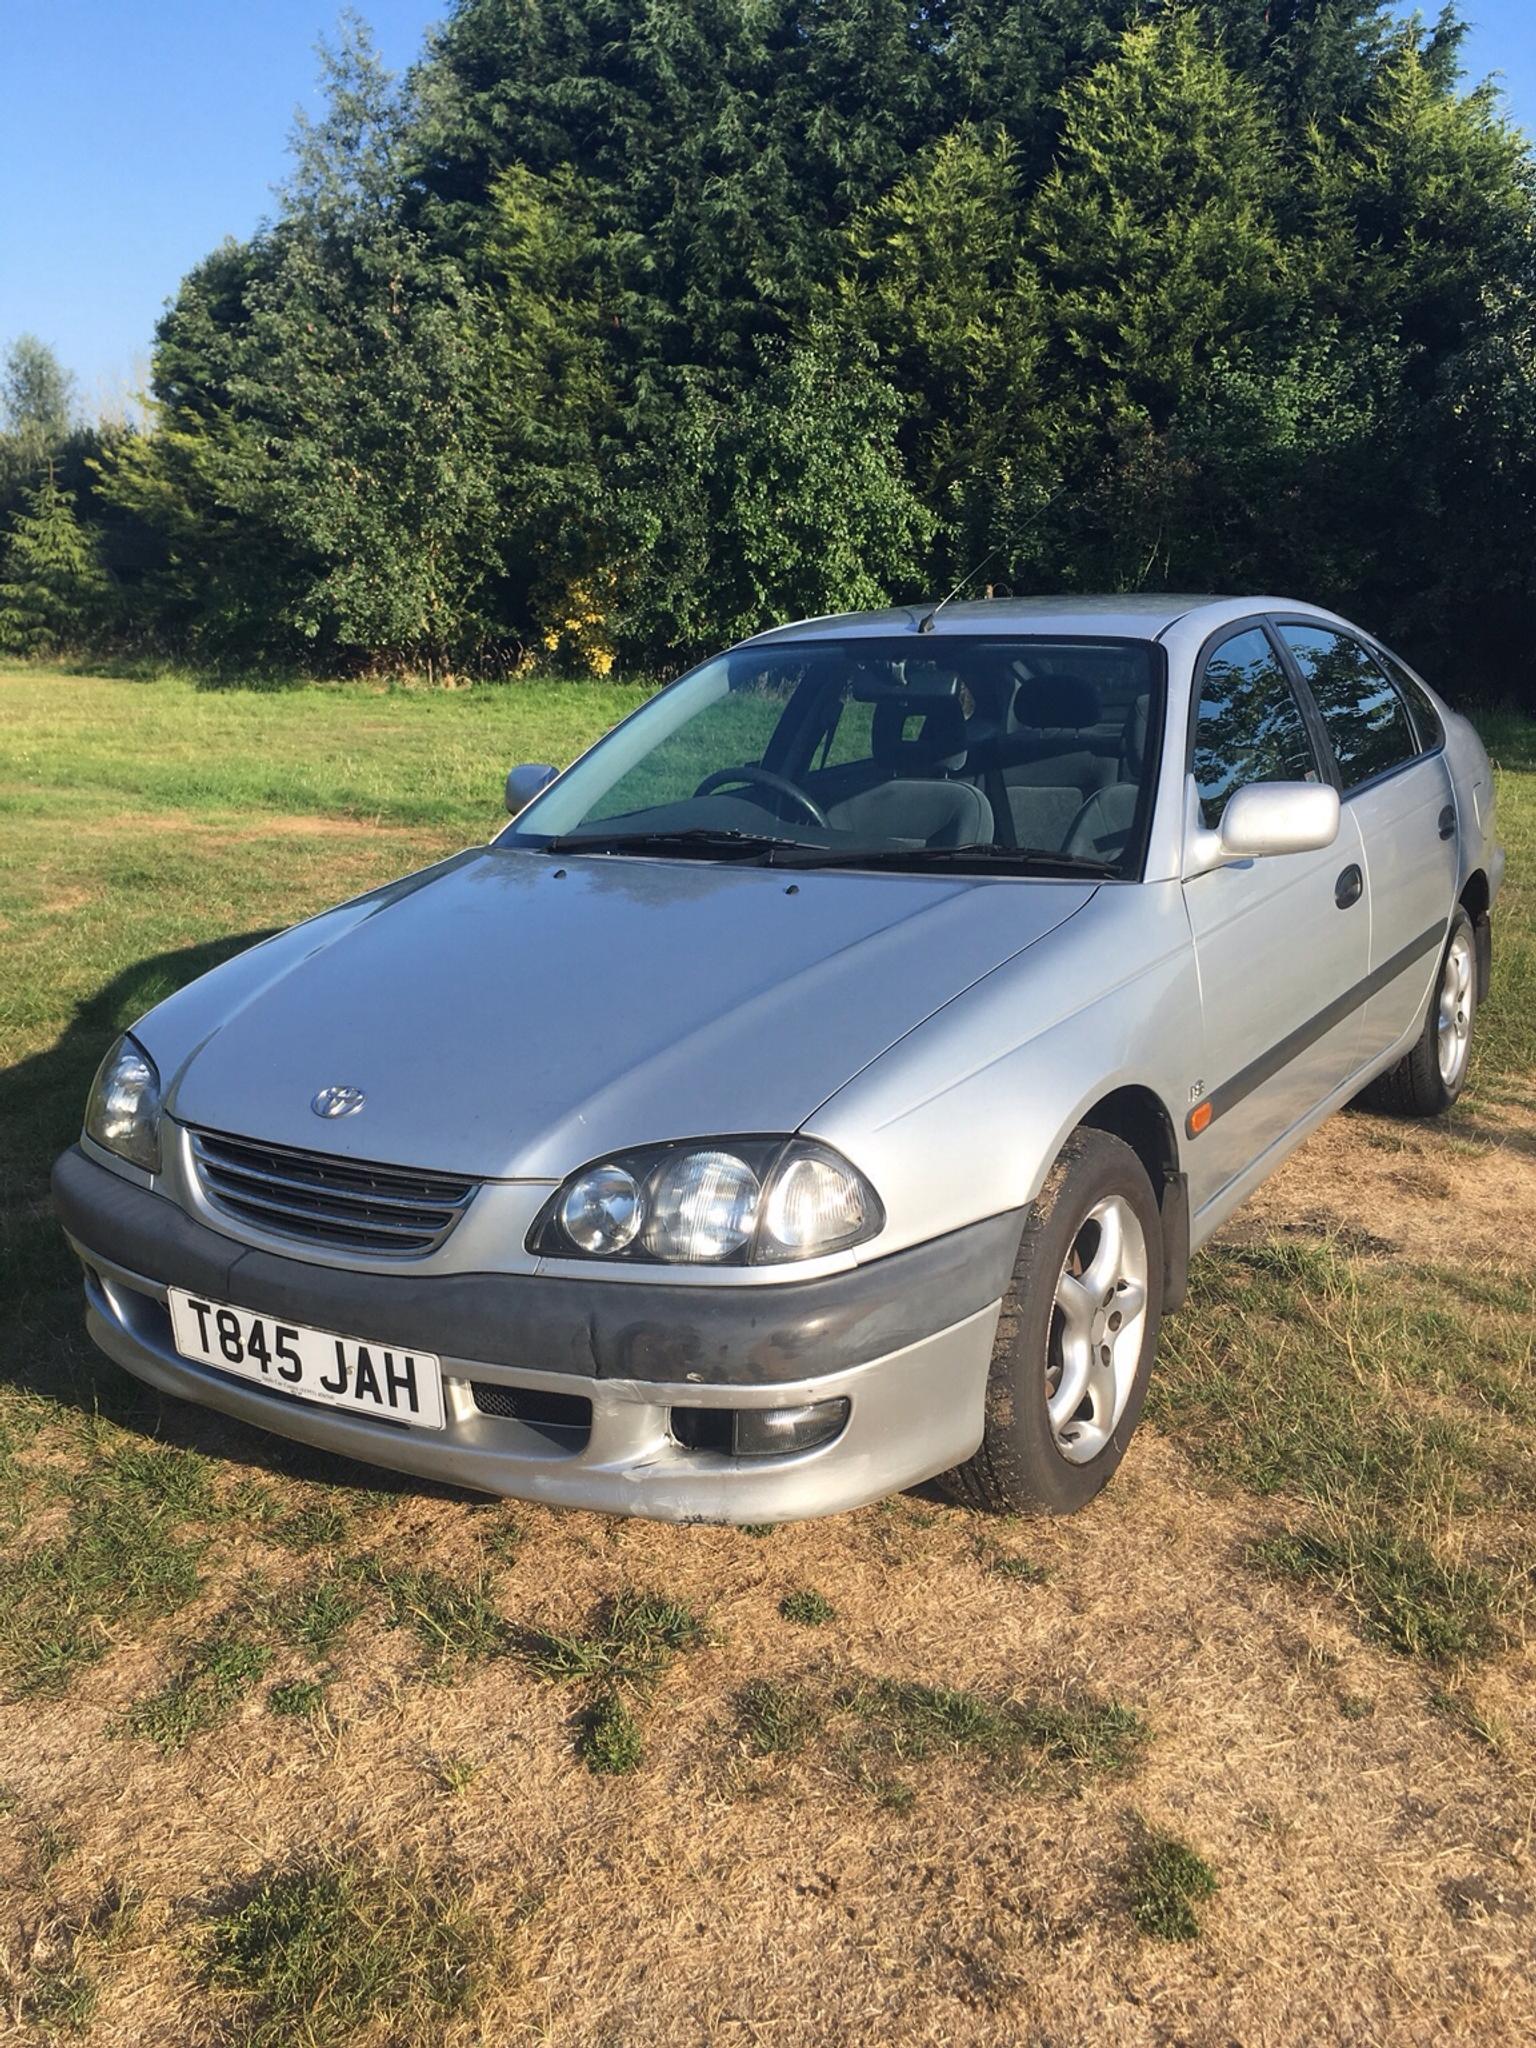 Toyota Avensis 1.8 5 door hatchback,1999 in Great Yarmouth